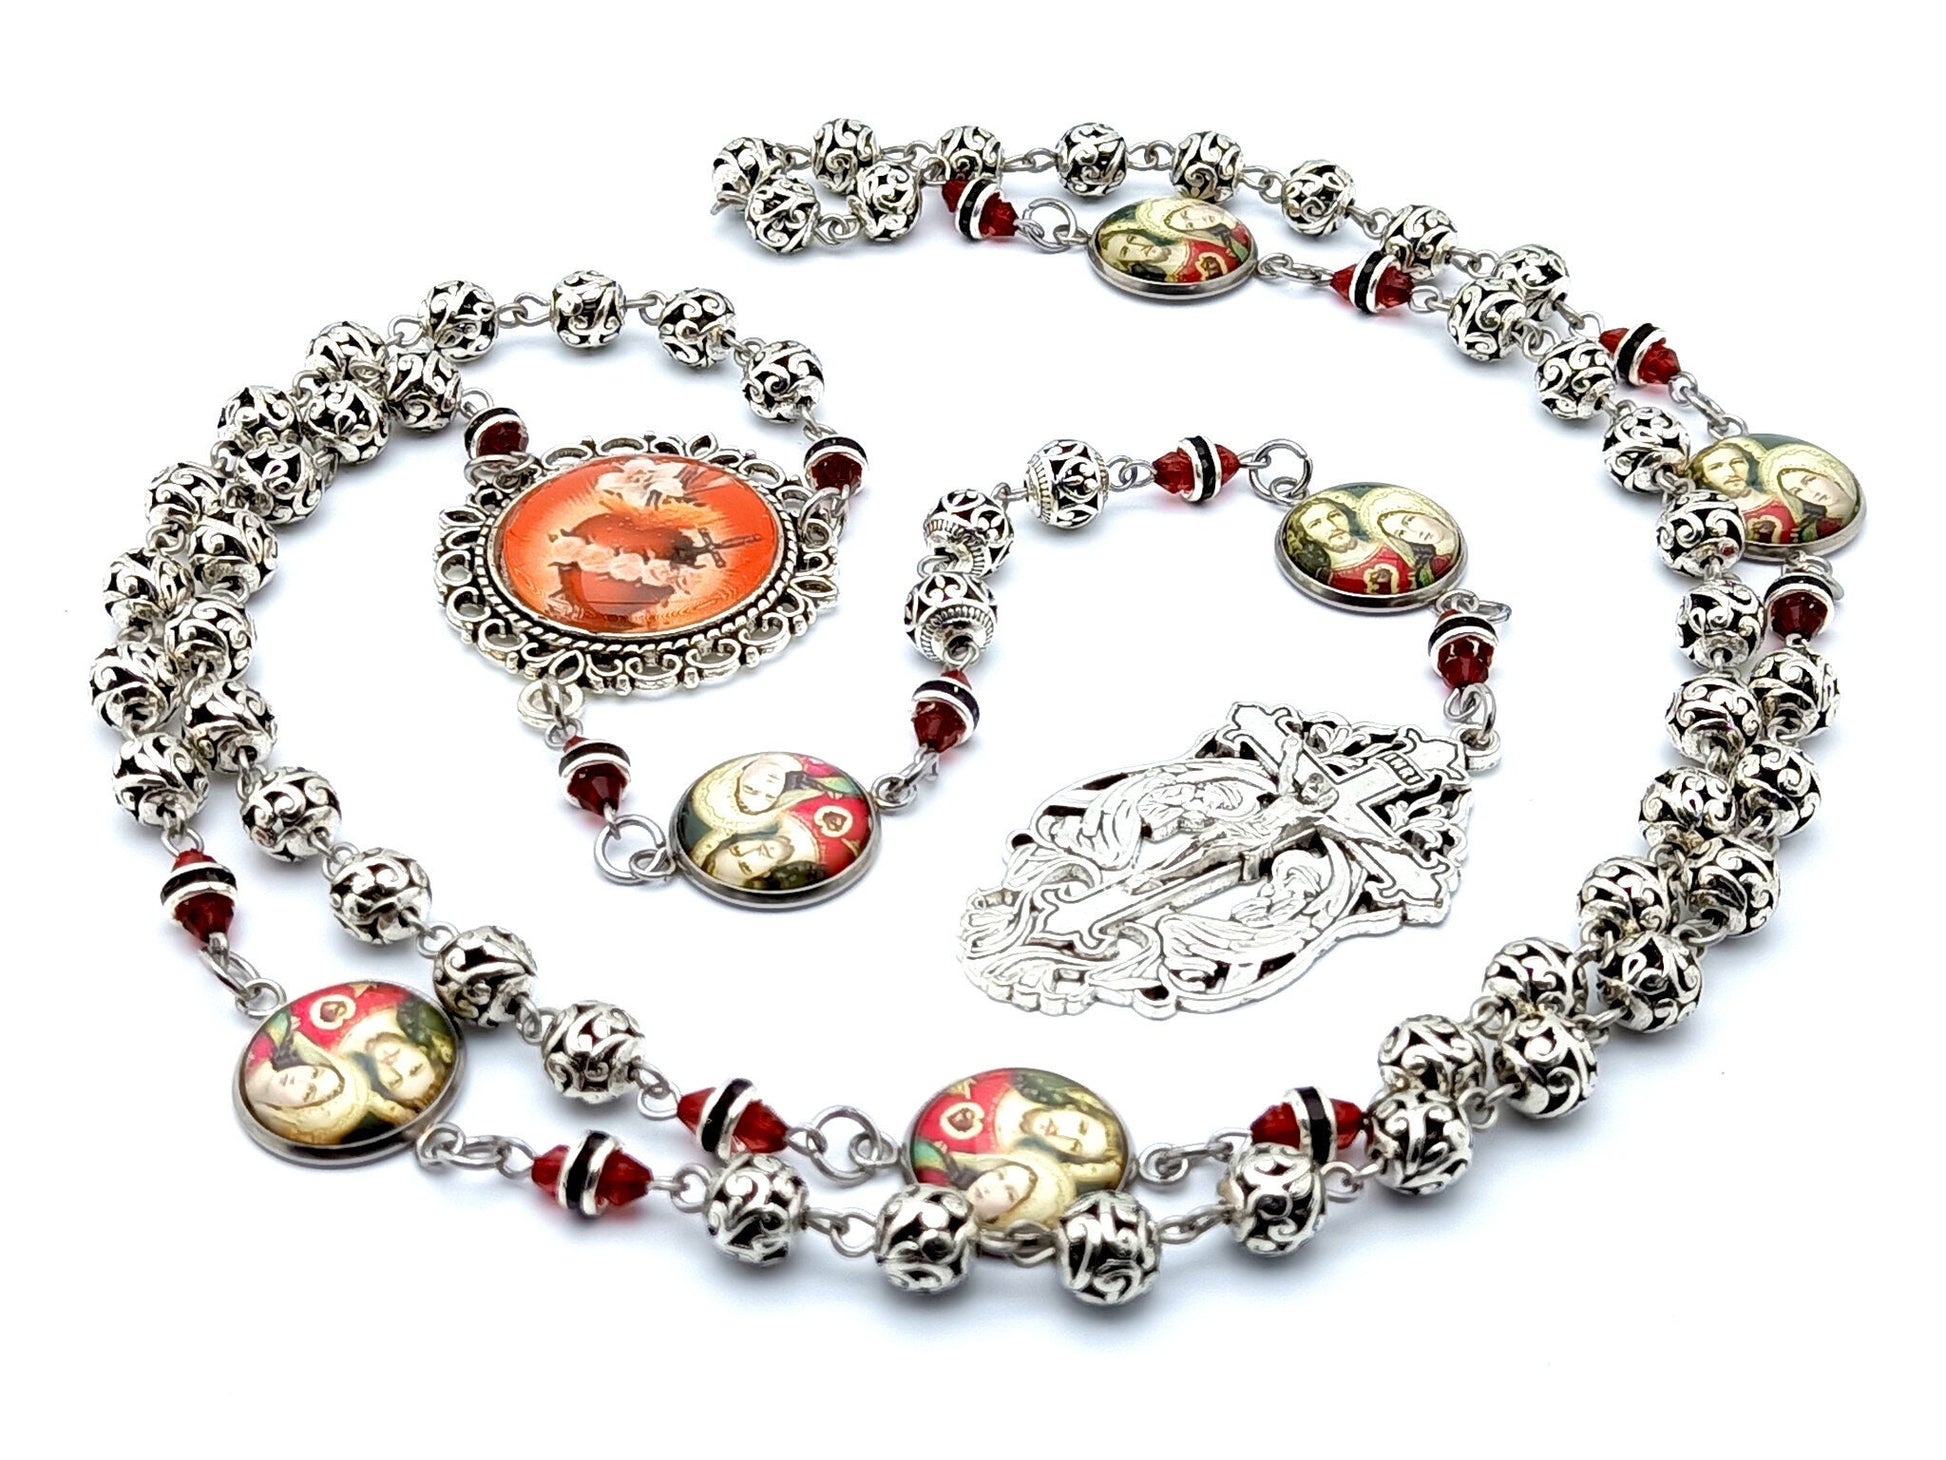 Two Hearts of Jesus and Mary unique rosary beads with Tibetan silver beads, Holy Angels crucifix and picture linking medal beads.